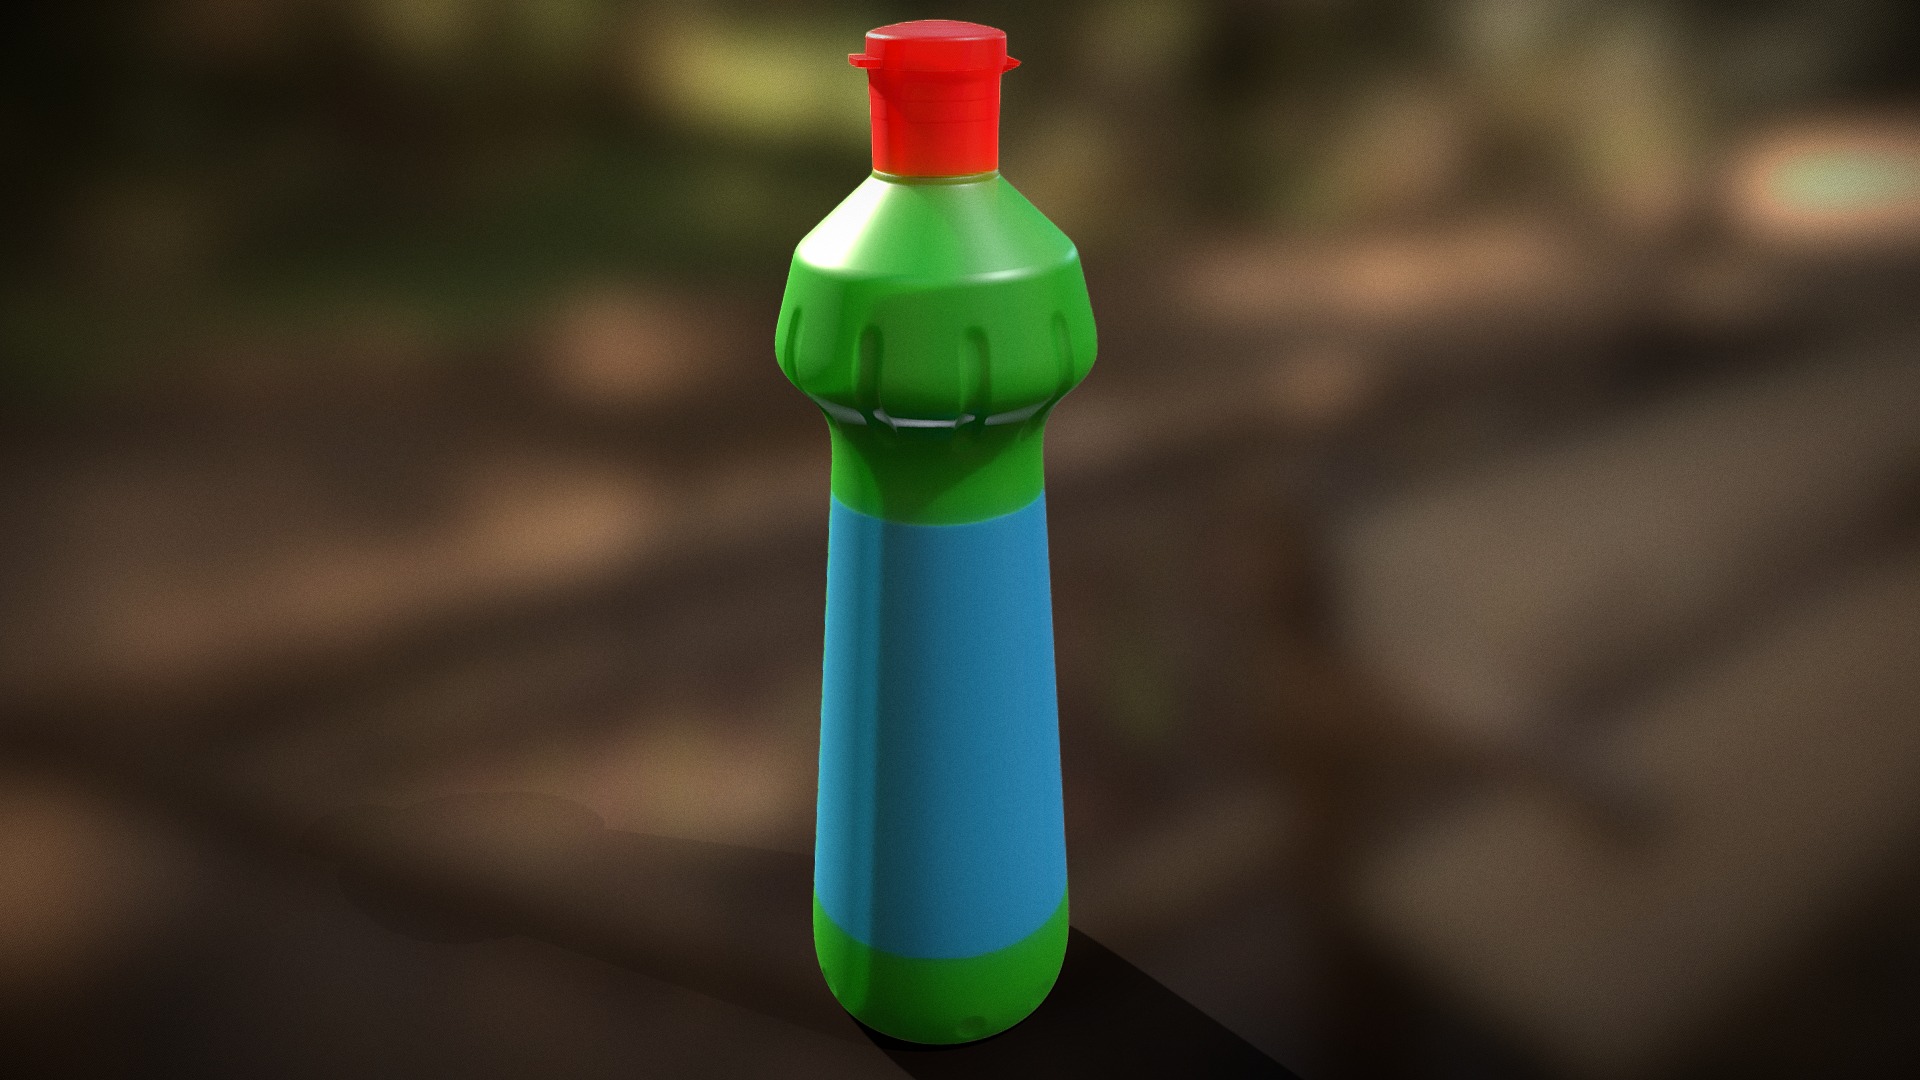 3D model Bottle Brill 001a - This is a 3D model of the Bottle Brill 001a. The 3D model is about a green and red bottle.